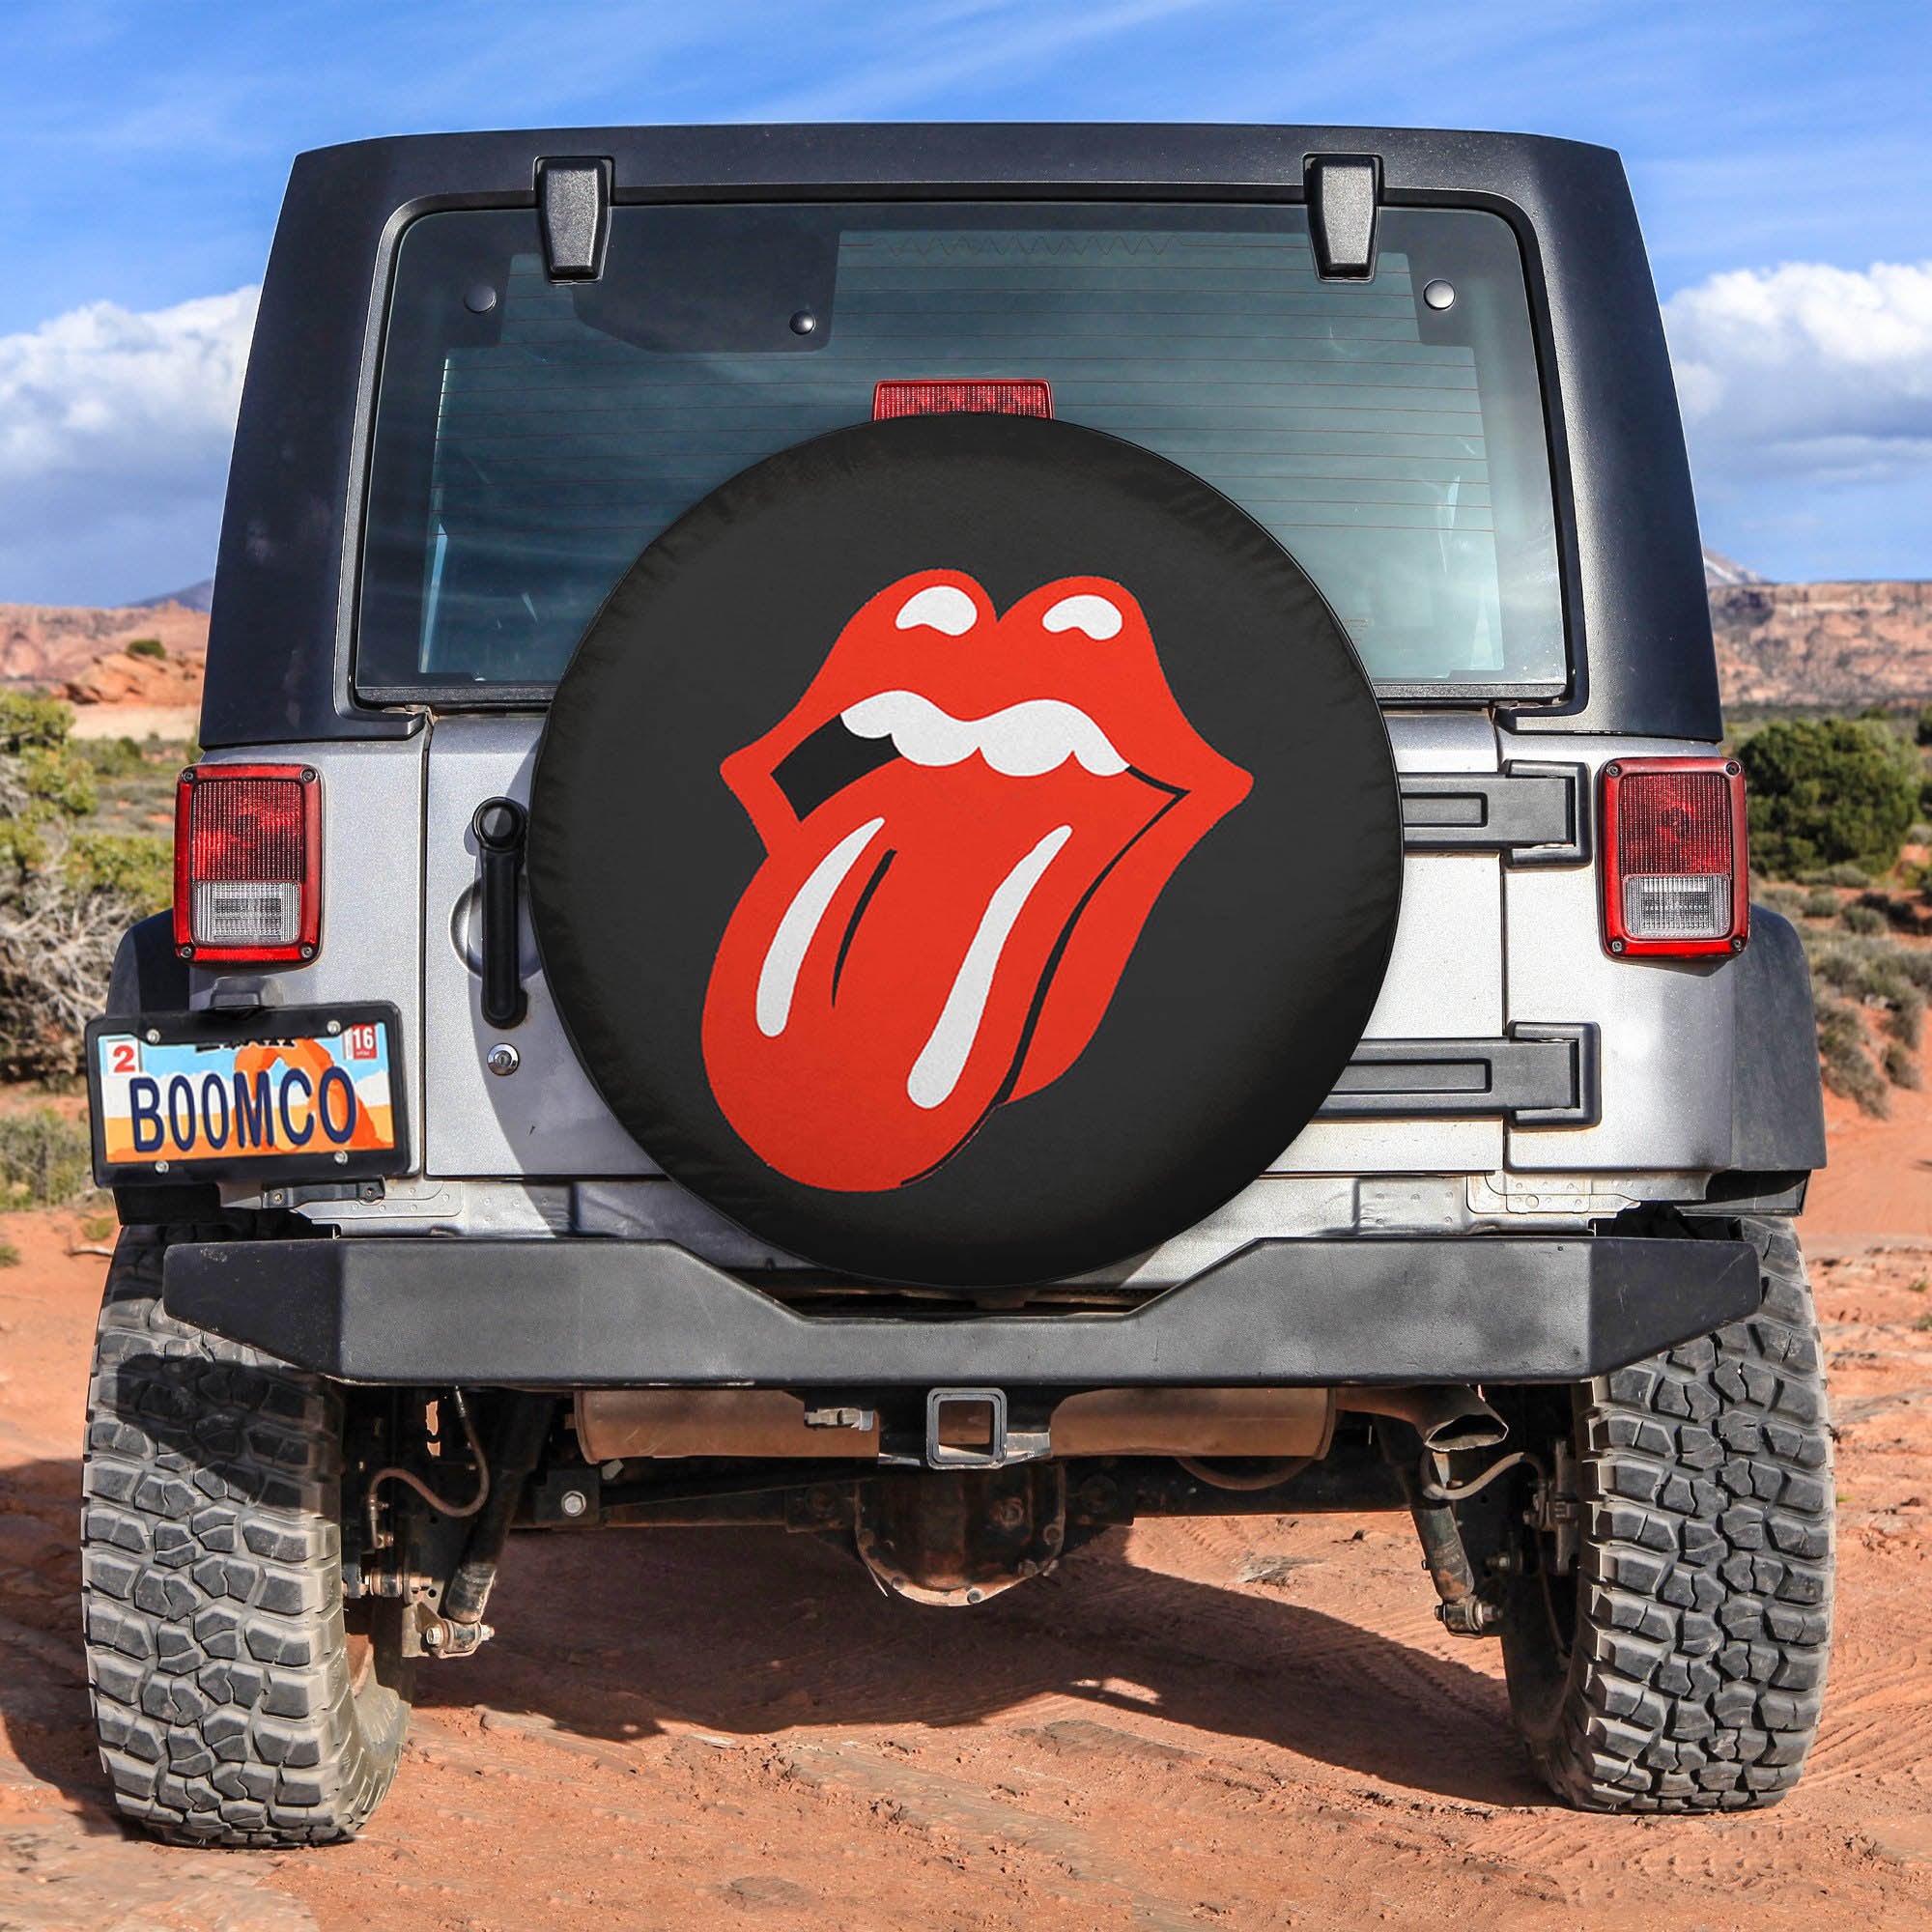 Funny Lady Lick Spare Tire Covers Gift For Campers Nearkii